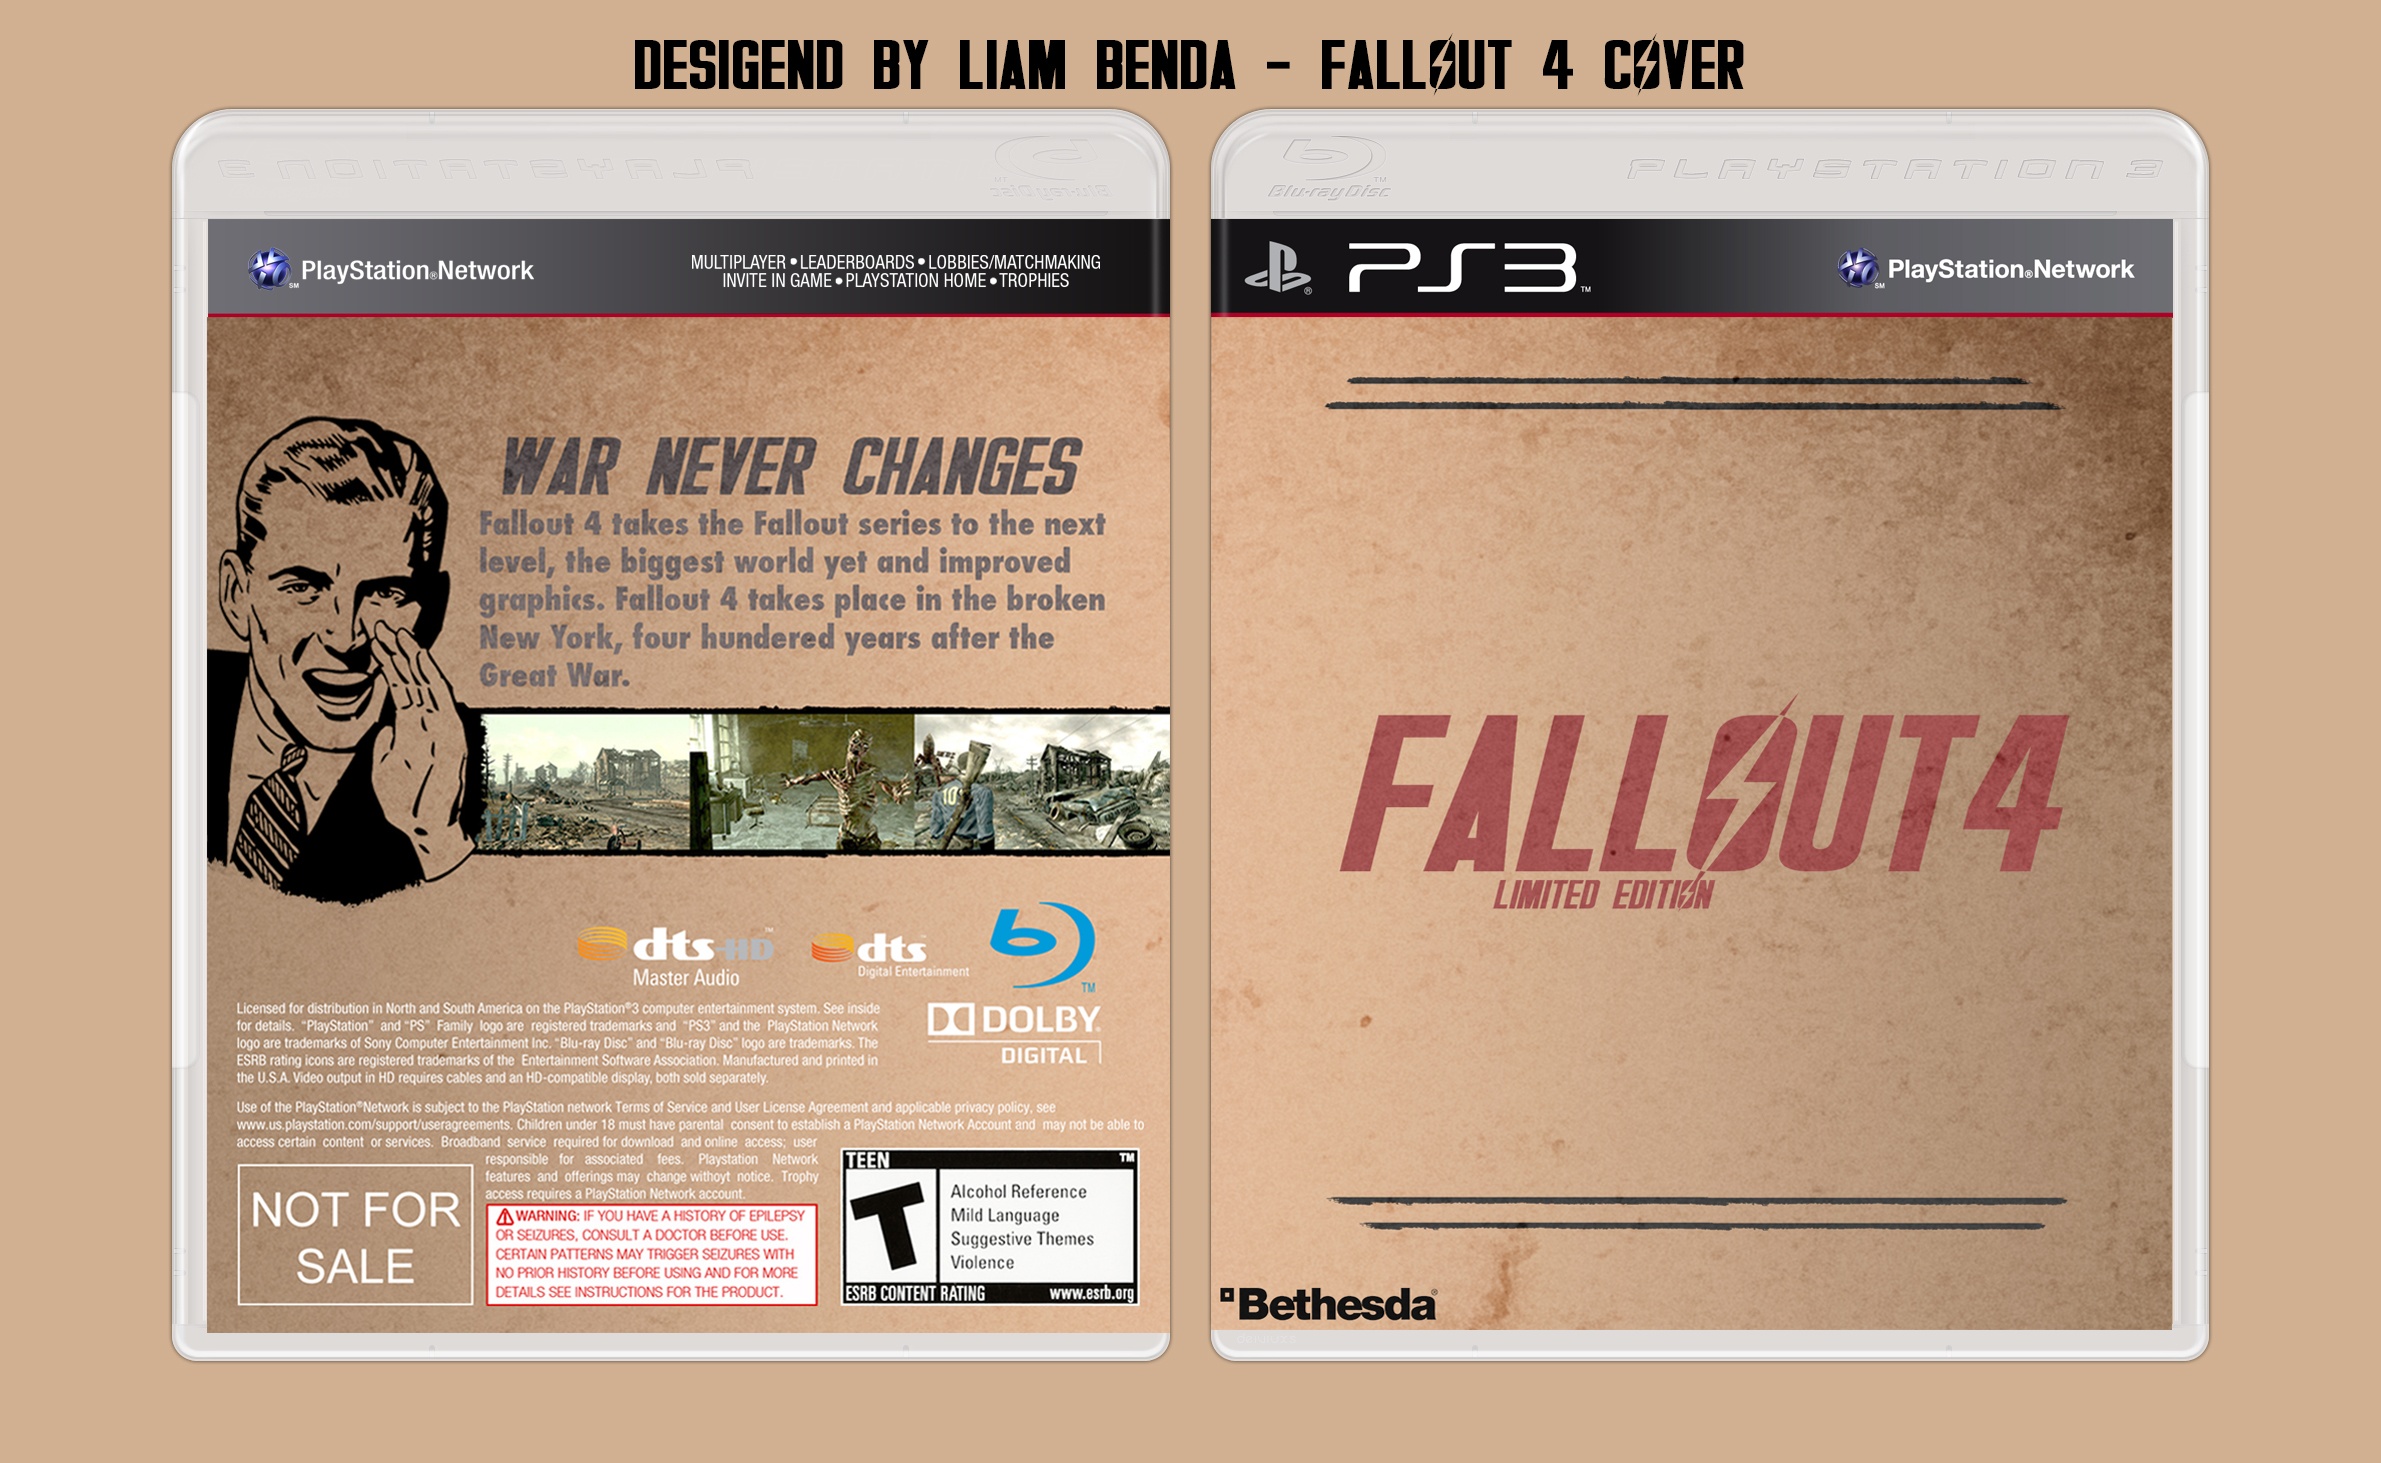 Fallout 4 Limited Edition box cover